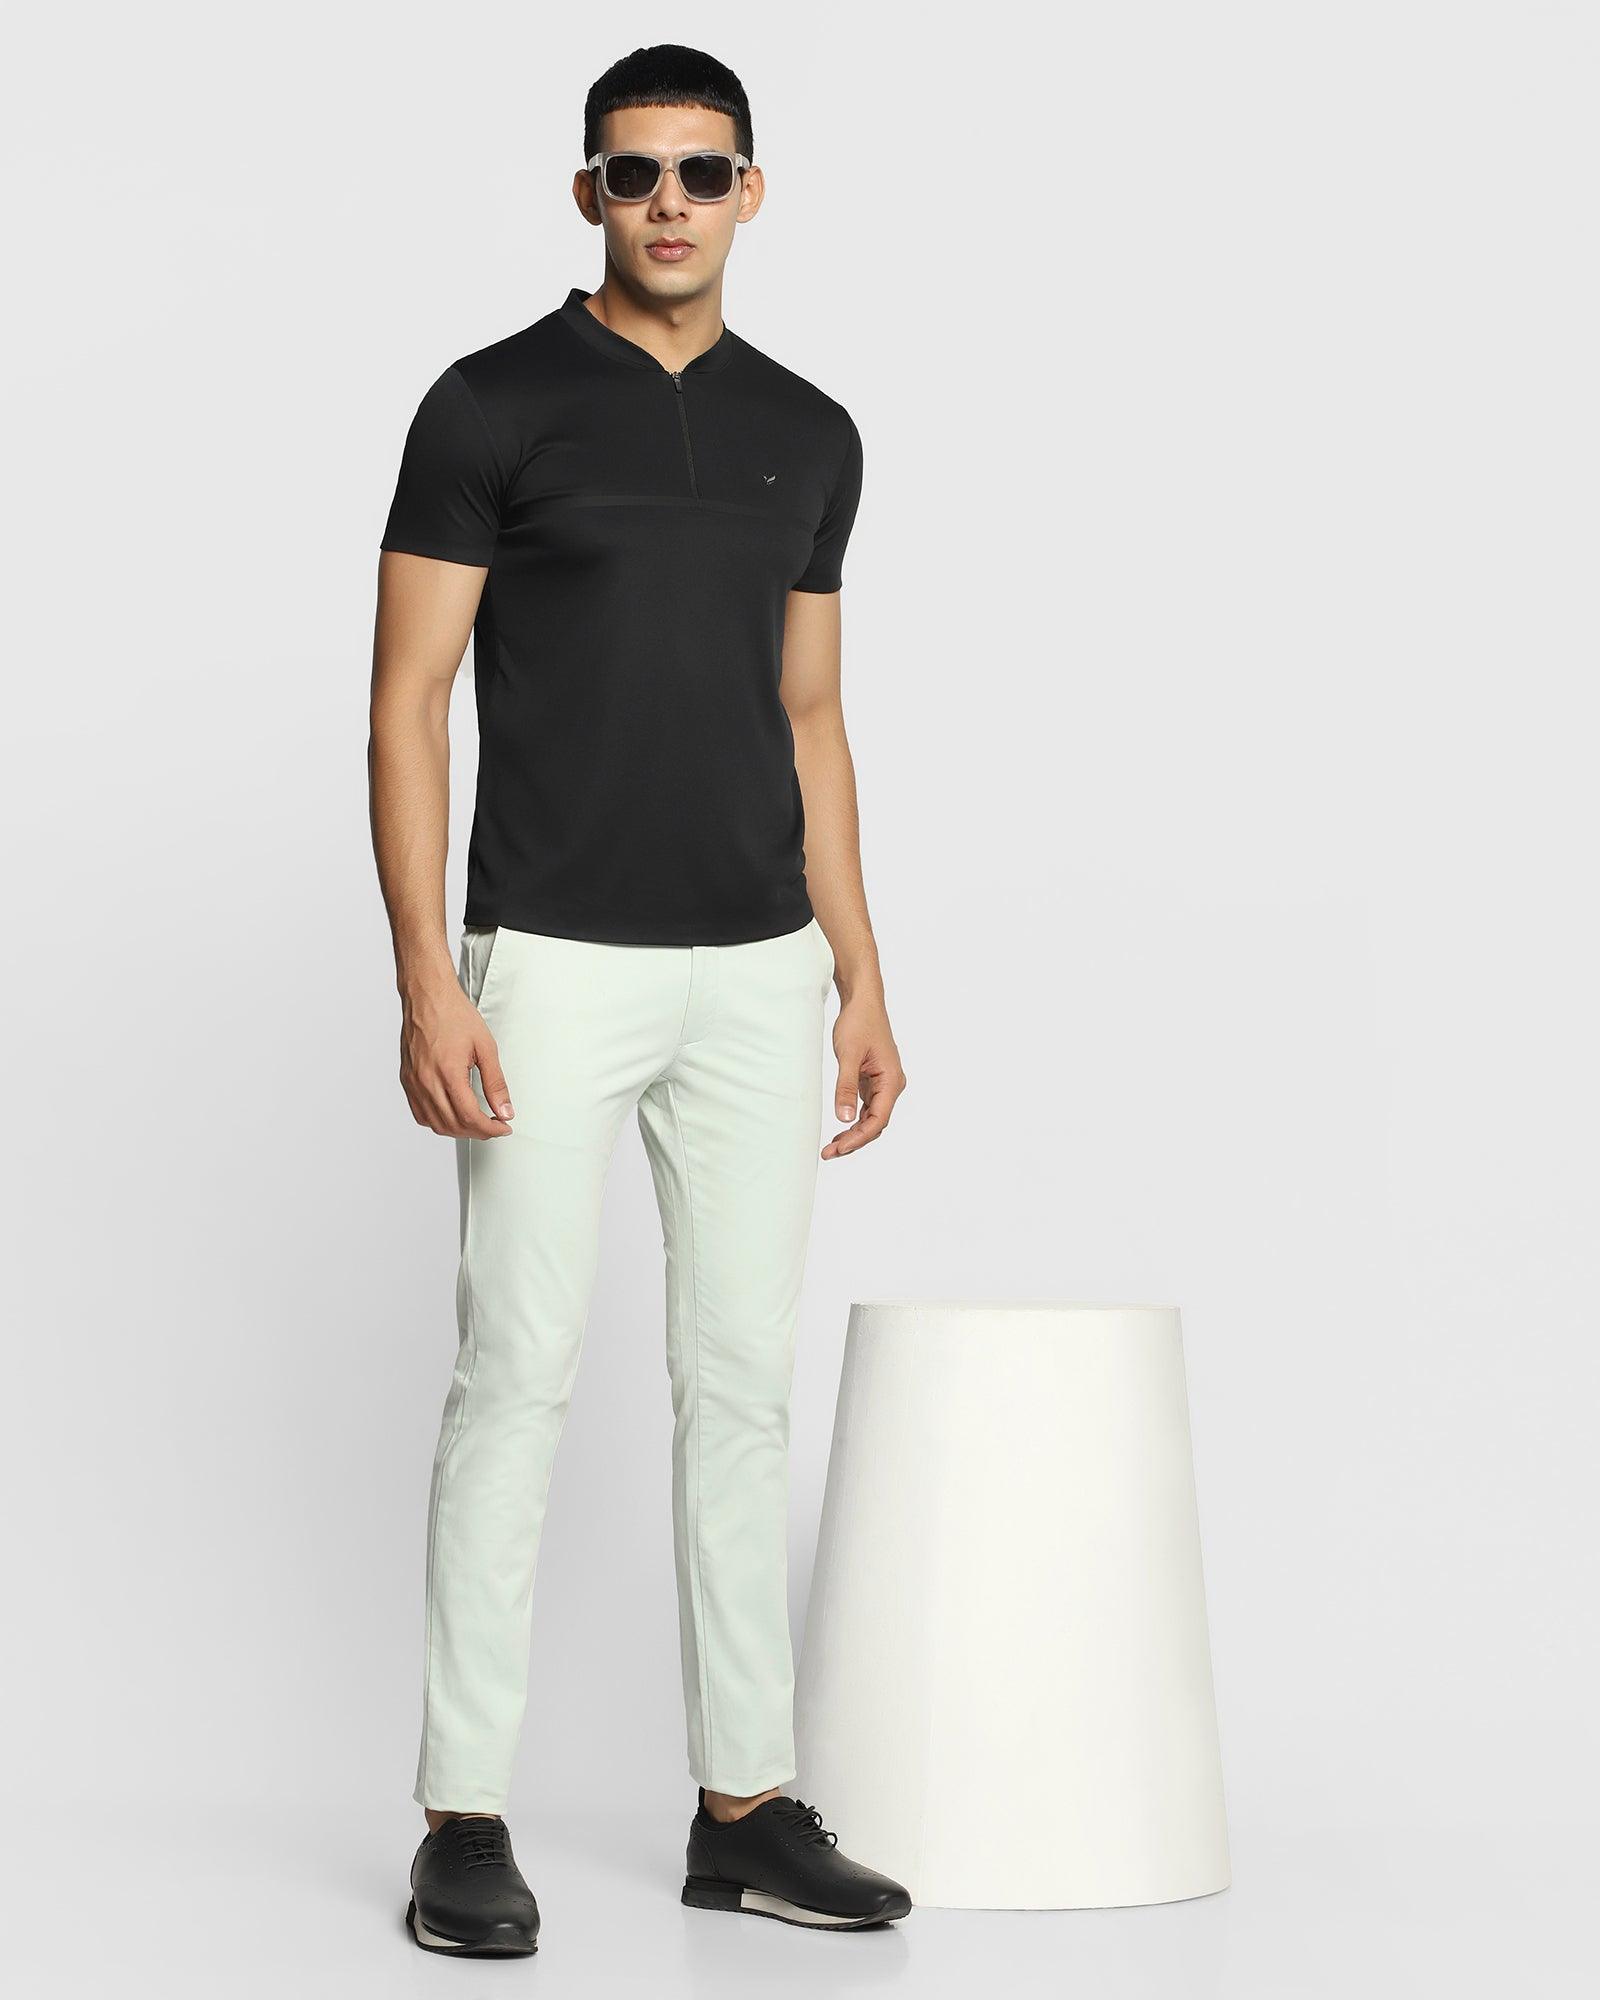 With white t shirt and black shoes | Mens fashion denim, Menswear, Mens  outfits